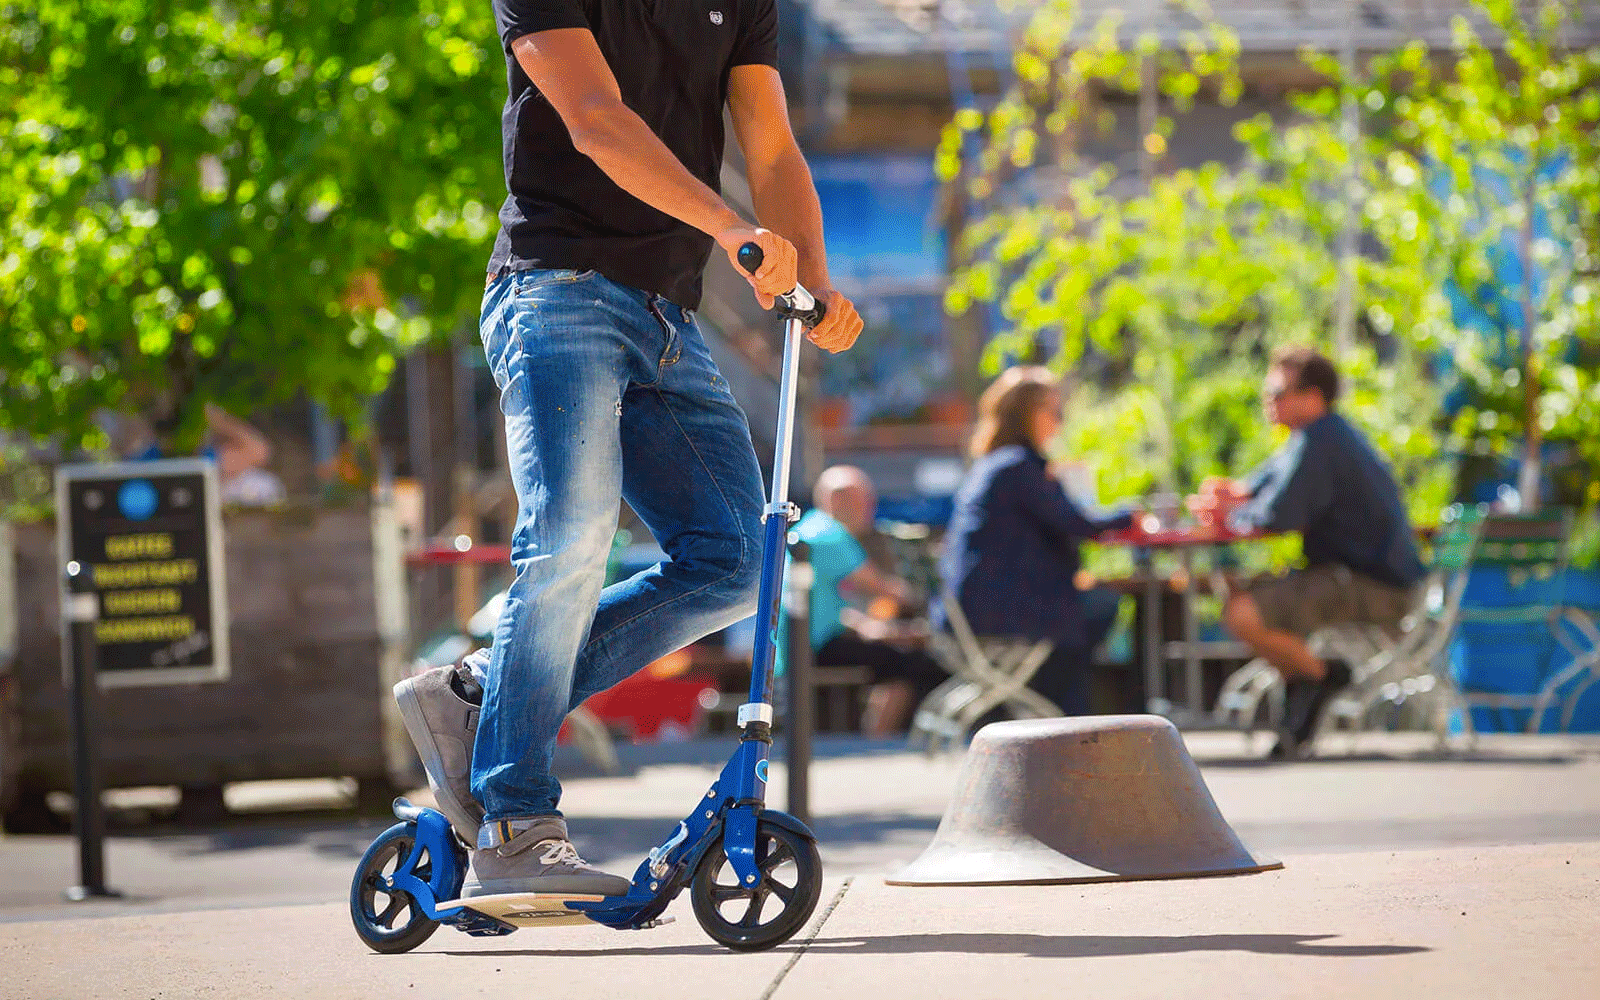 micro flex deluxe blue 200mm kick scooter with male rider